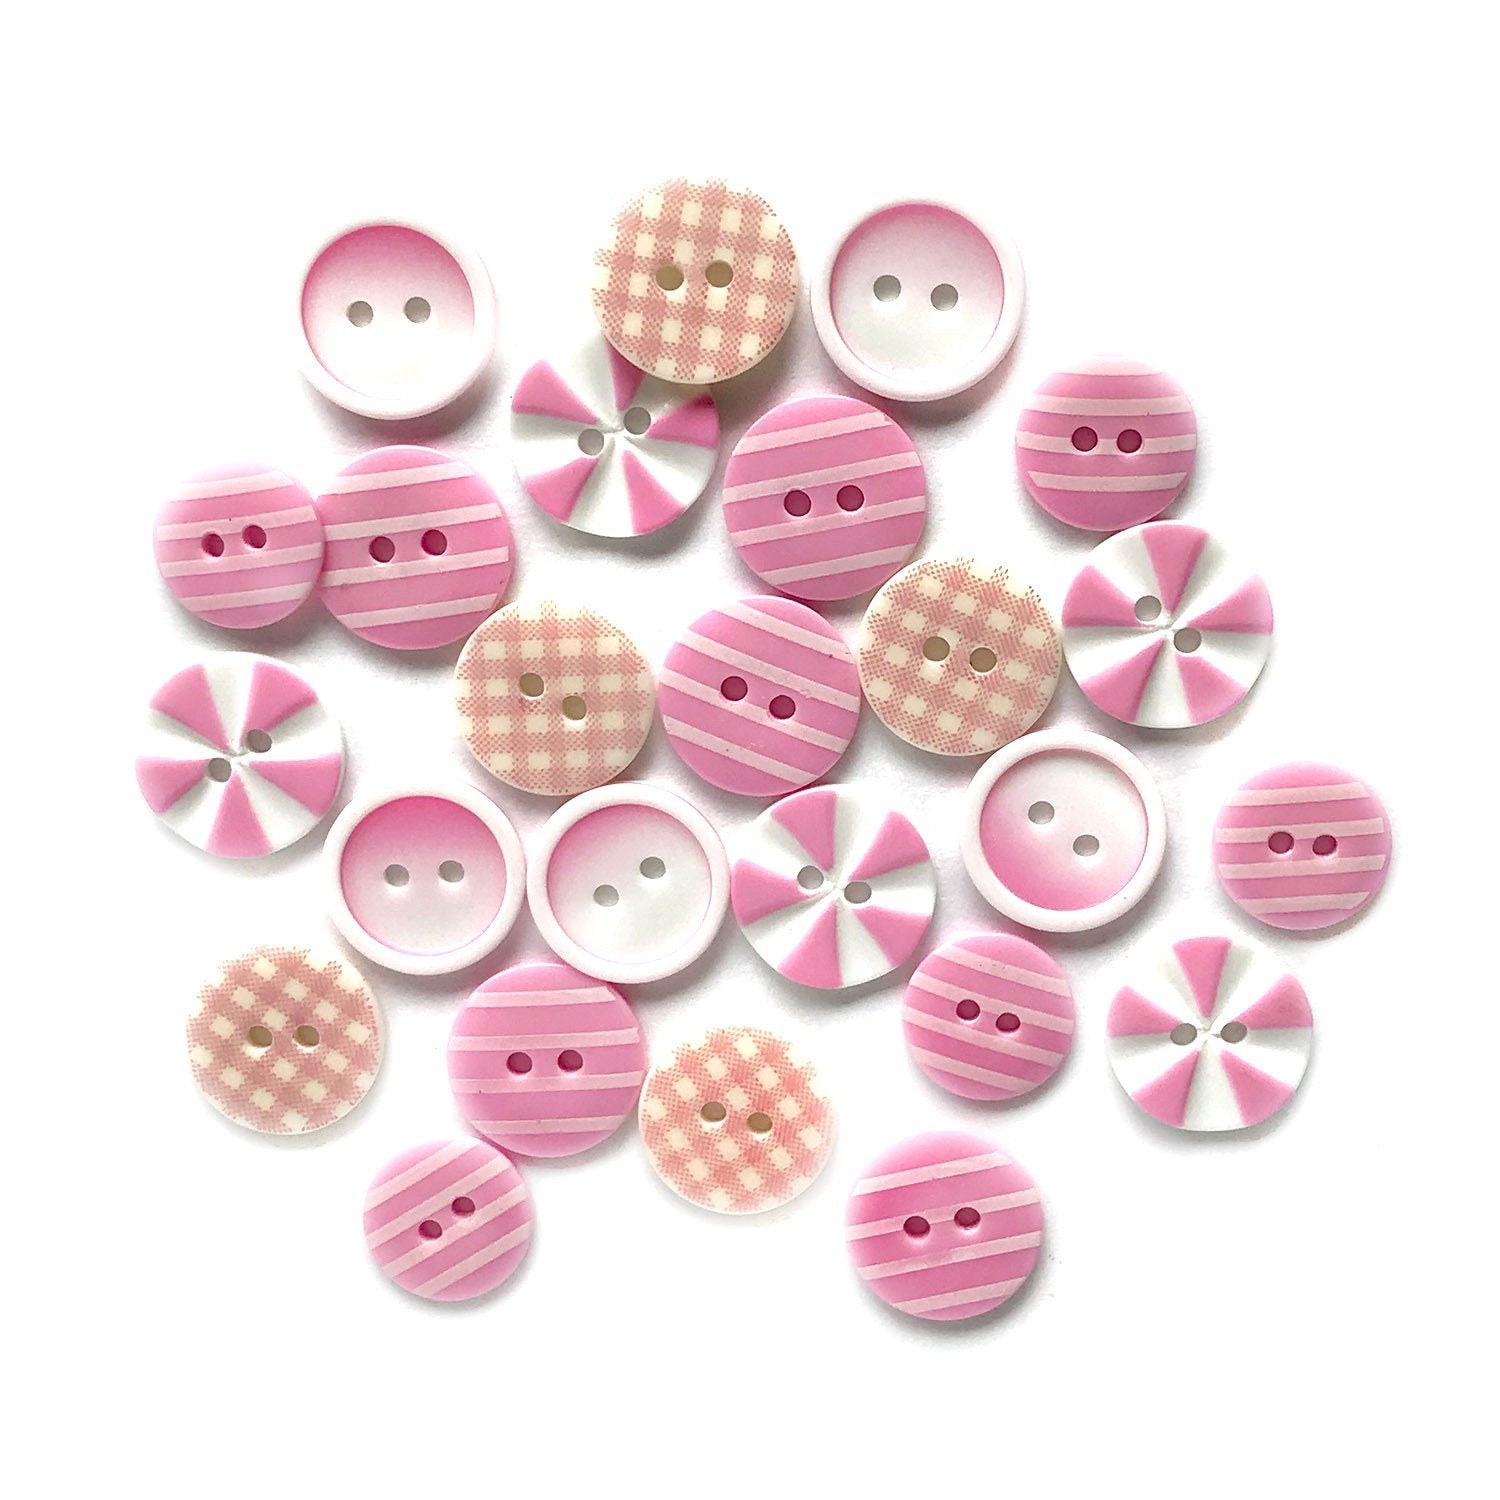 IBA Indianbeautifulart Pink 1 Inch Buttons For Sewing Fancy Buttons For  Crafts 2 Hole Dot & White Floral Artistic Scrapbooking Canvas Buttons Pack  Of 50 